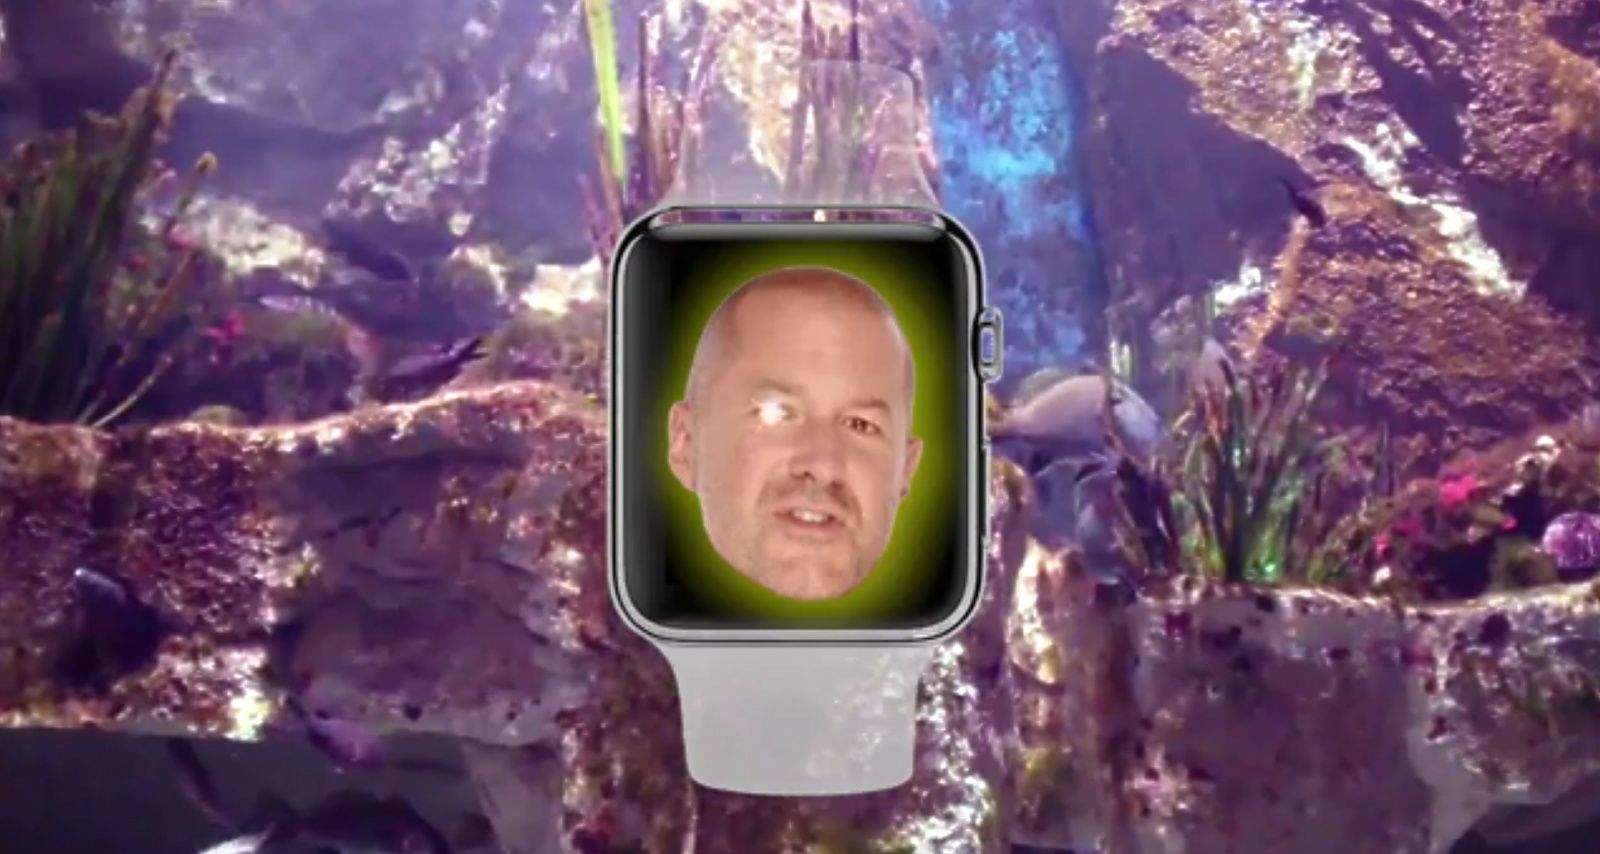 A starry-eyed, slurry-tongued Jony Ive raves about the Apple Watch in a new parody video. Photo: Gizmodo